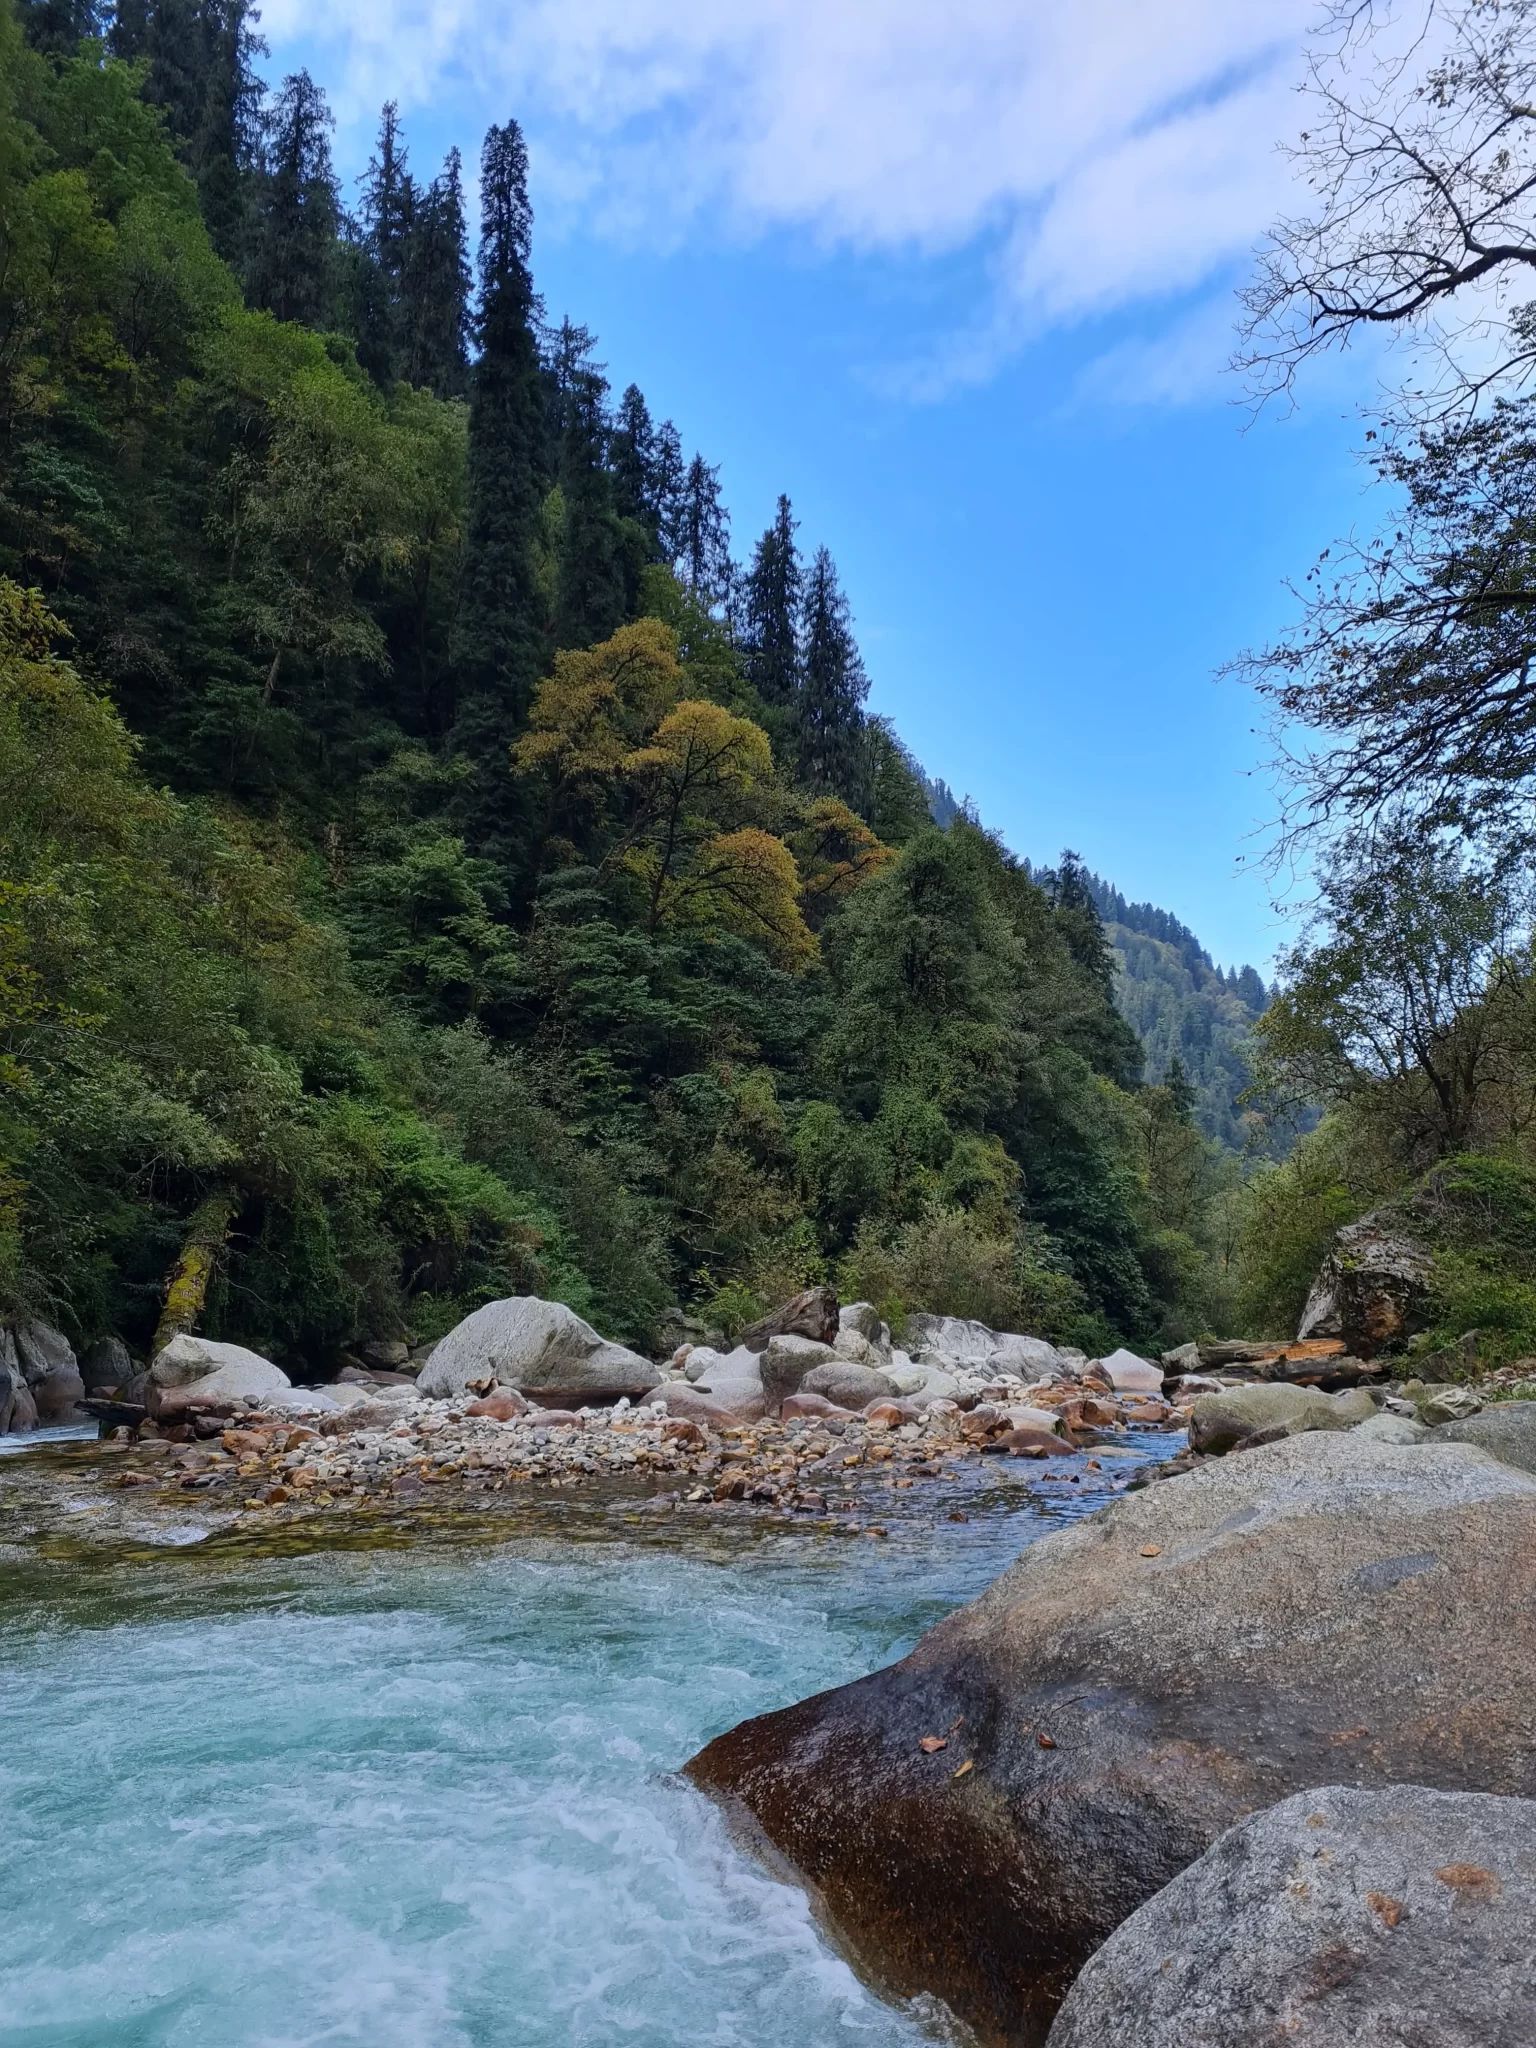 Rolla GHNP Great Himalayan National Park Tirthan Valley Trek with Tek Singh local guide